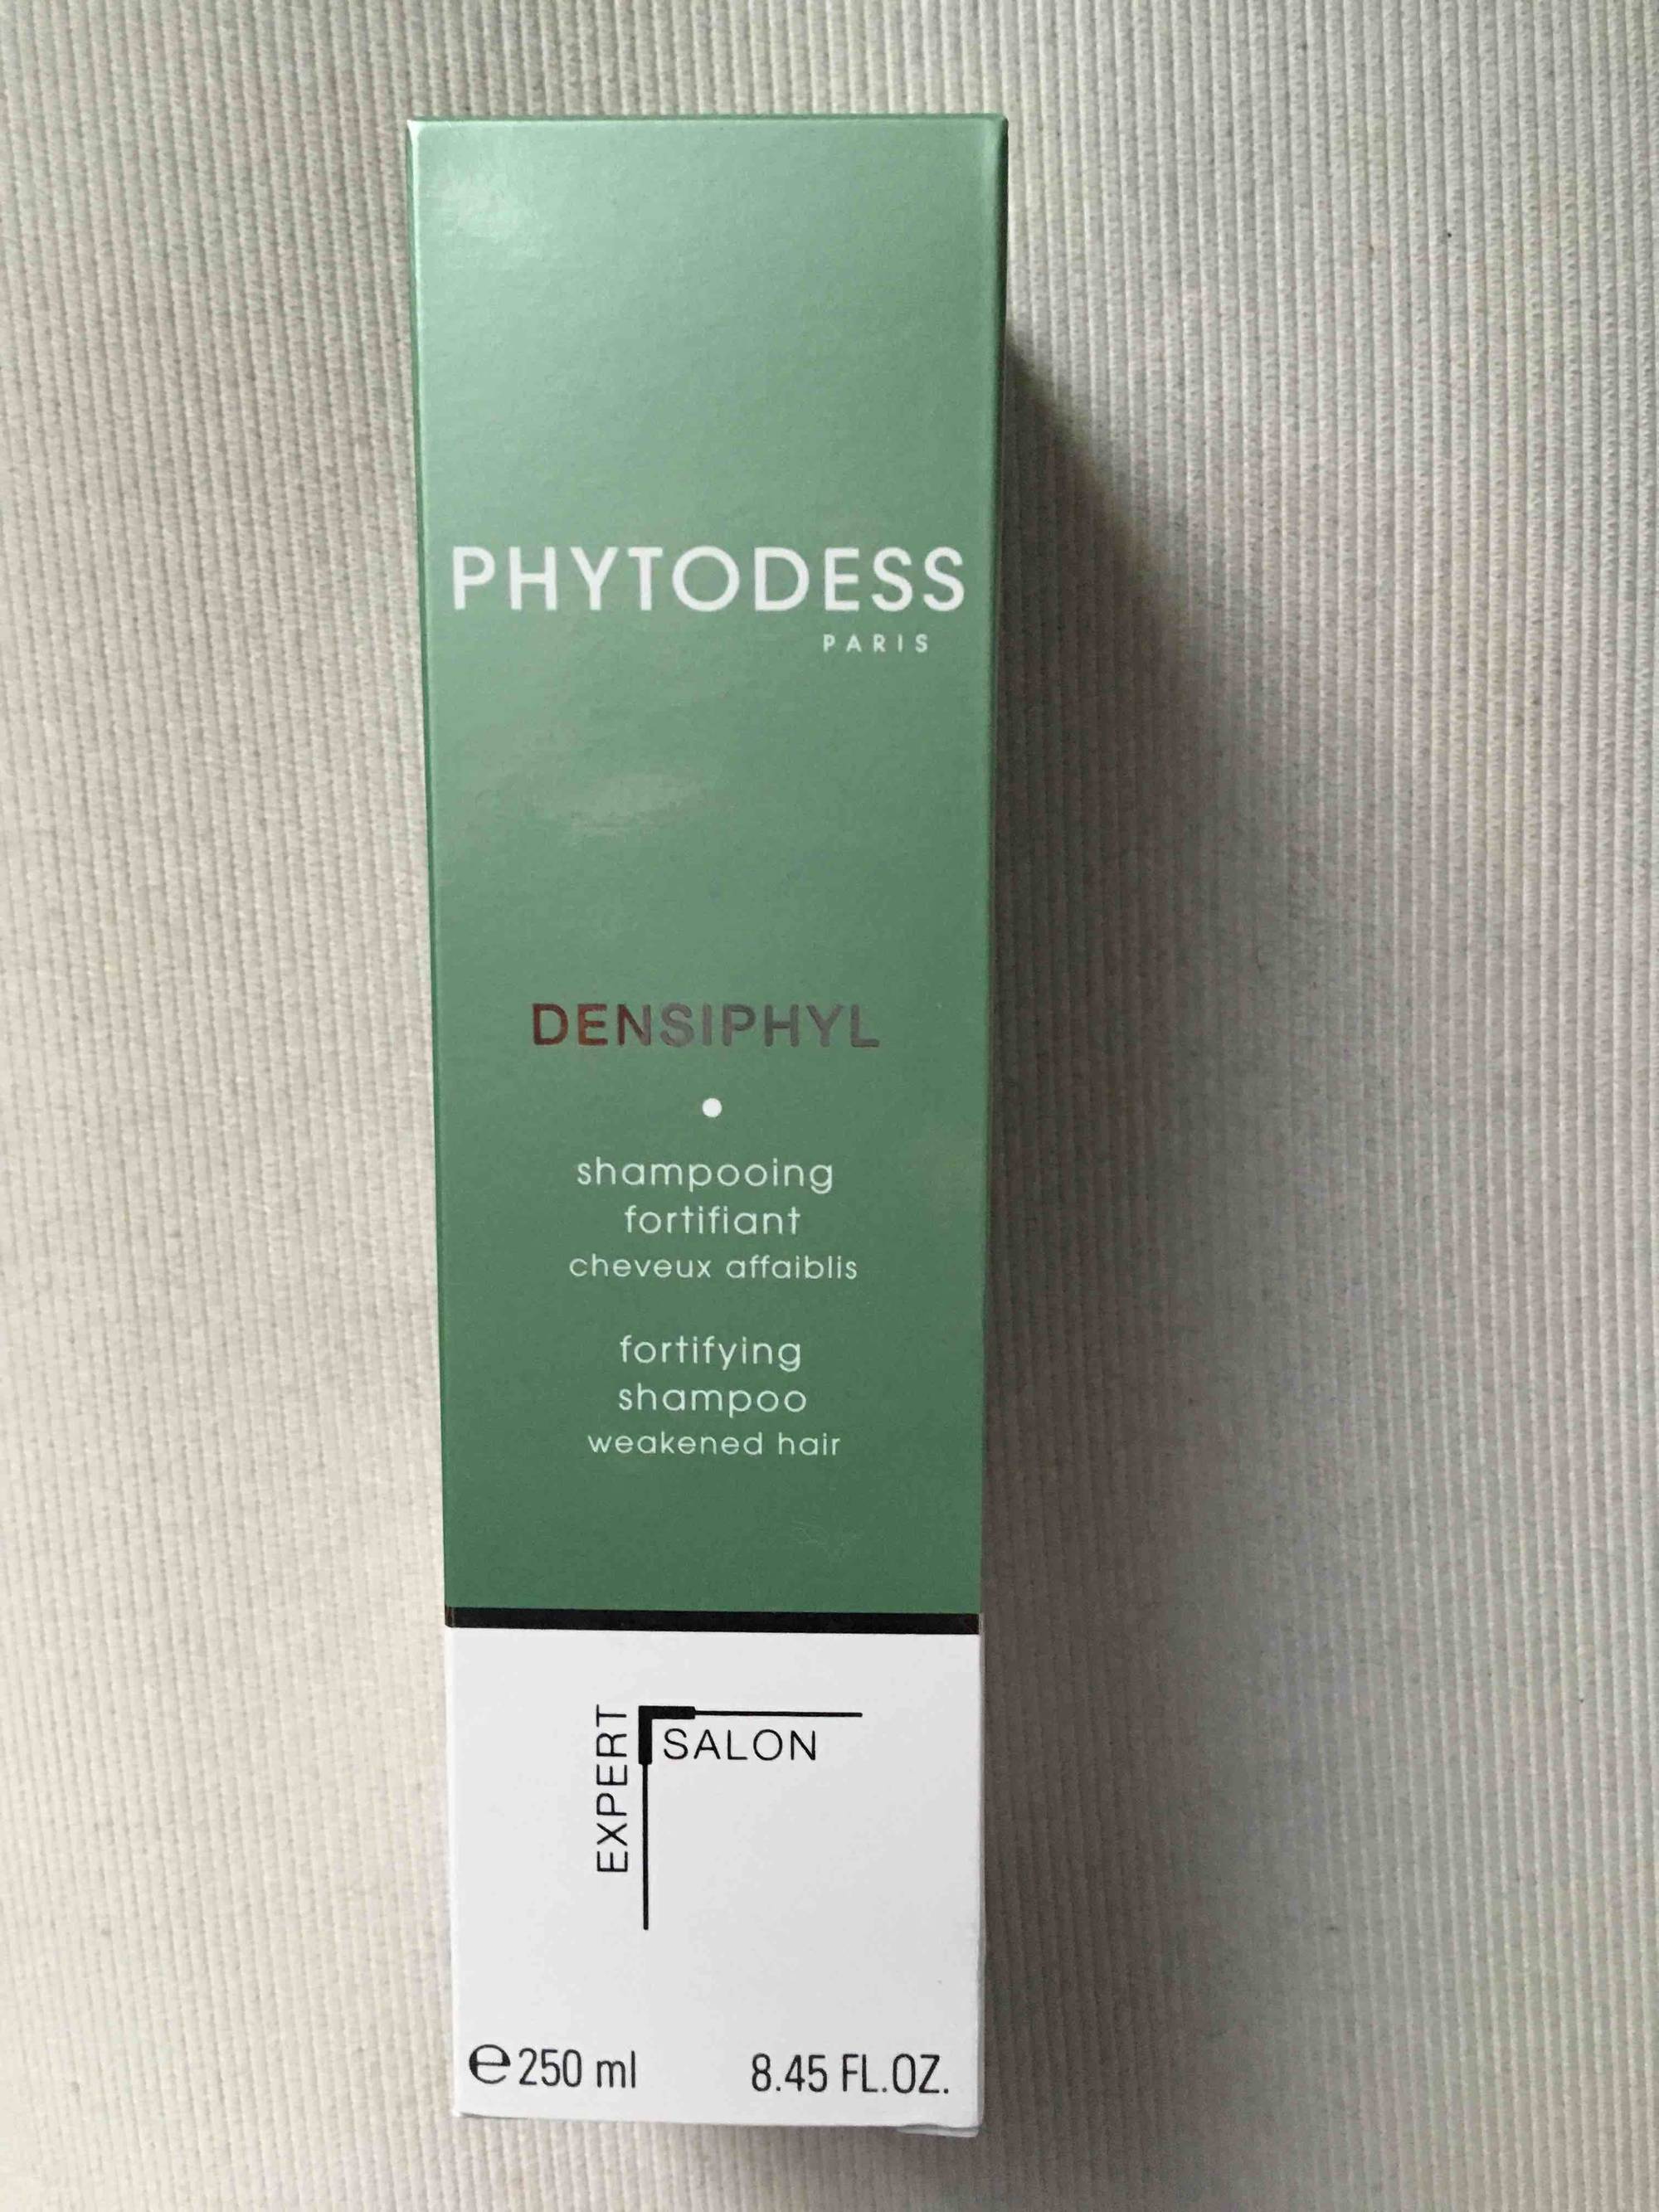 PHYTODESS PARIS - Densiphyl - Shampooing fortifiant